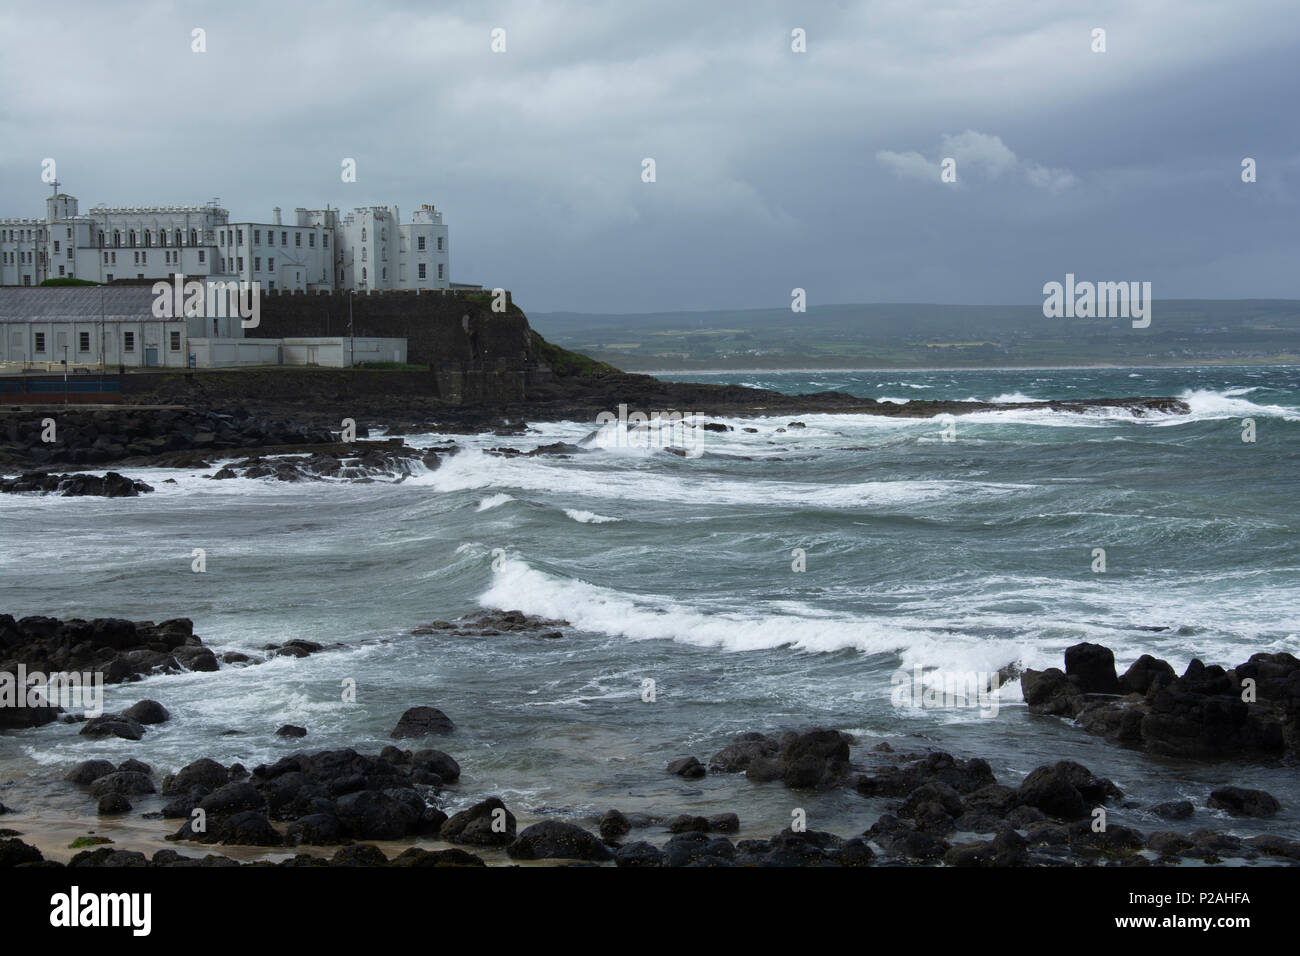 The Promenade, Portstewart,Northern Ireland. 14th June 2018. Storm â€œHectorâ€ passes through the North Coast of Northern Ireland causing rough seas but not as much damage as predicted. Credit: Brian Wilkinson/Alamy Live News Stock Photo